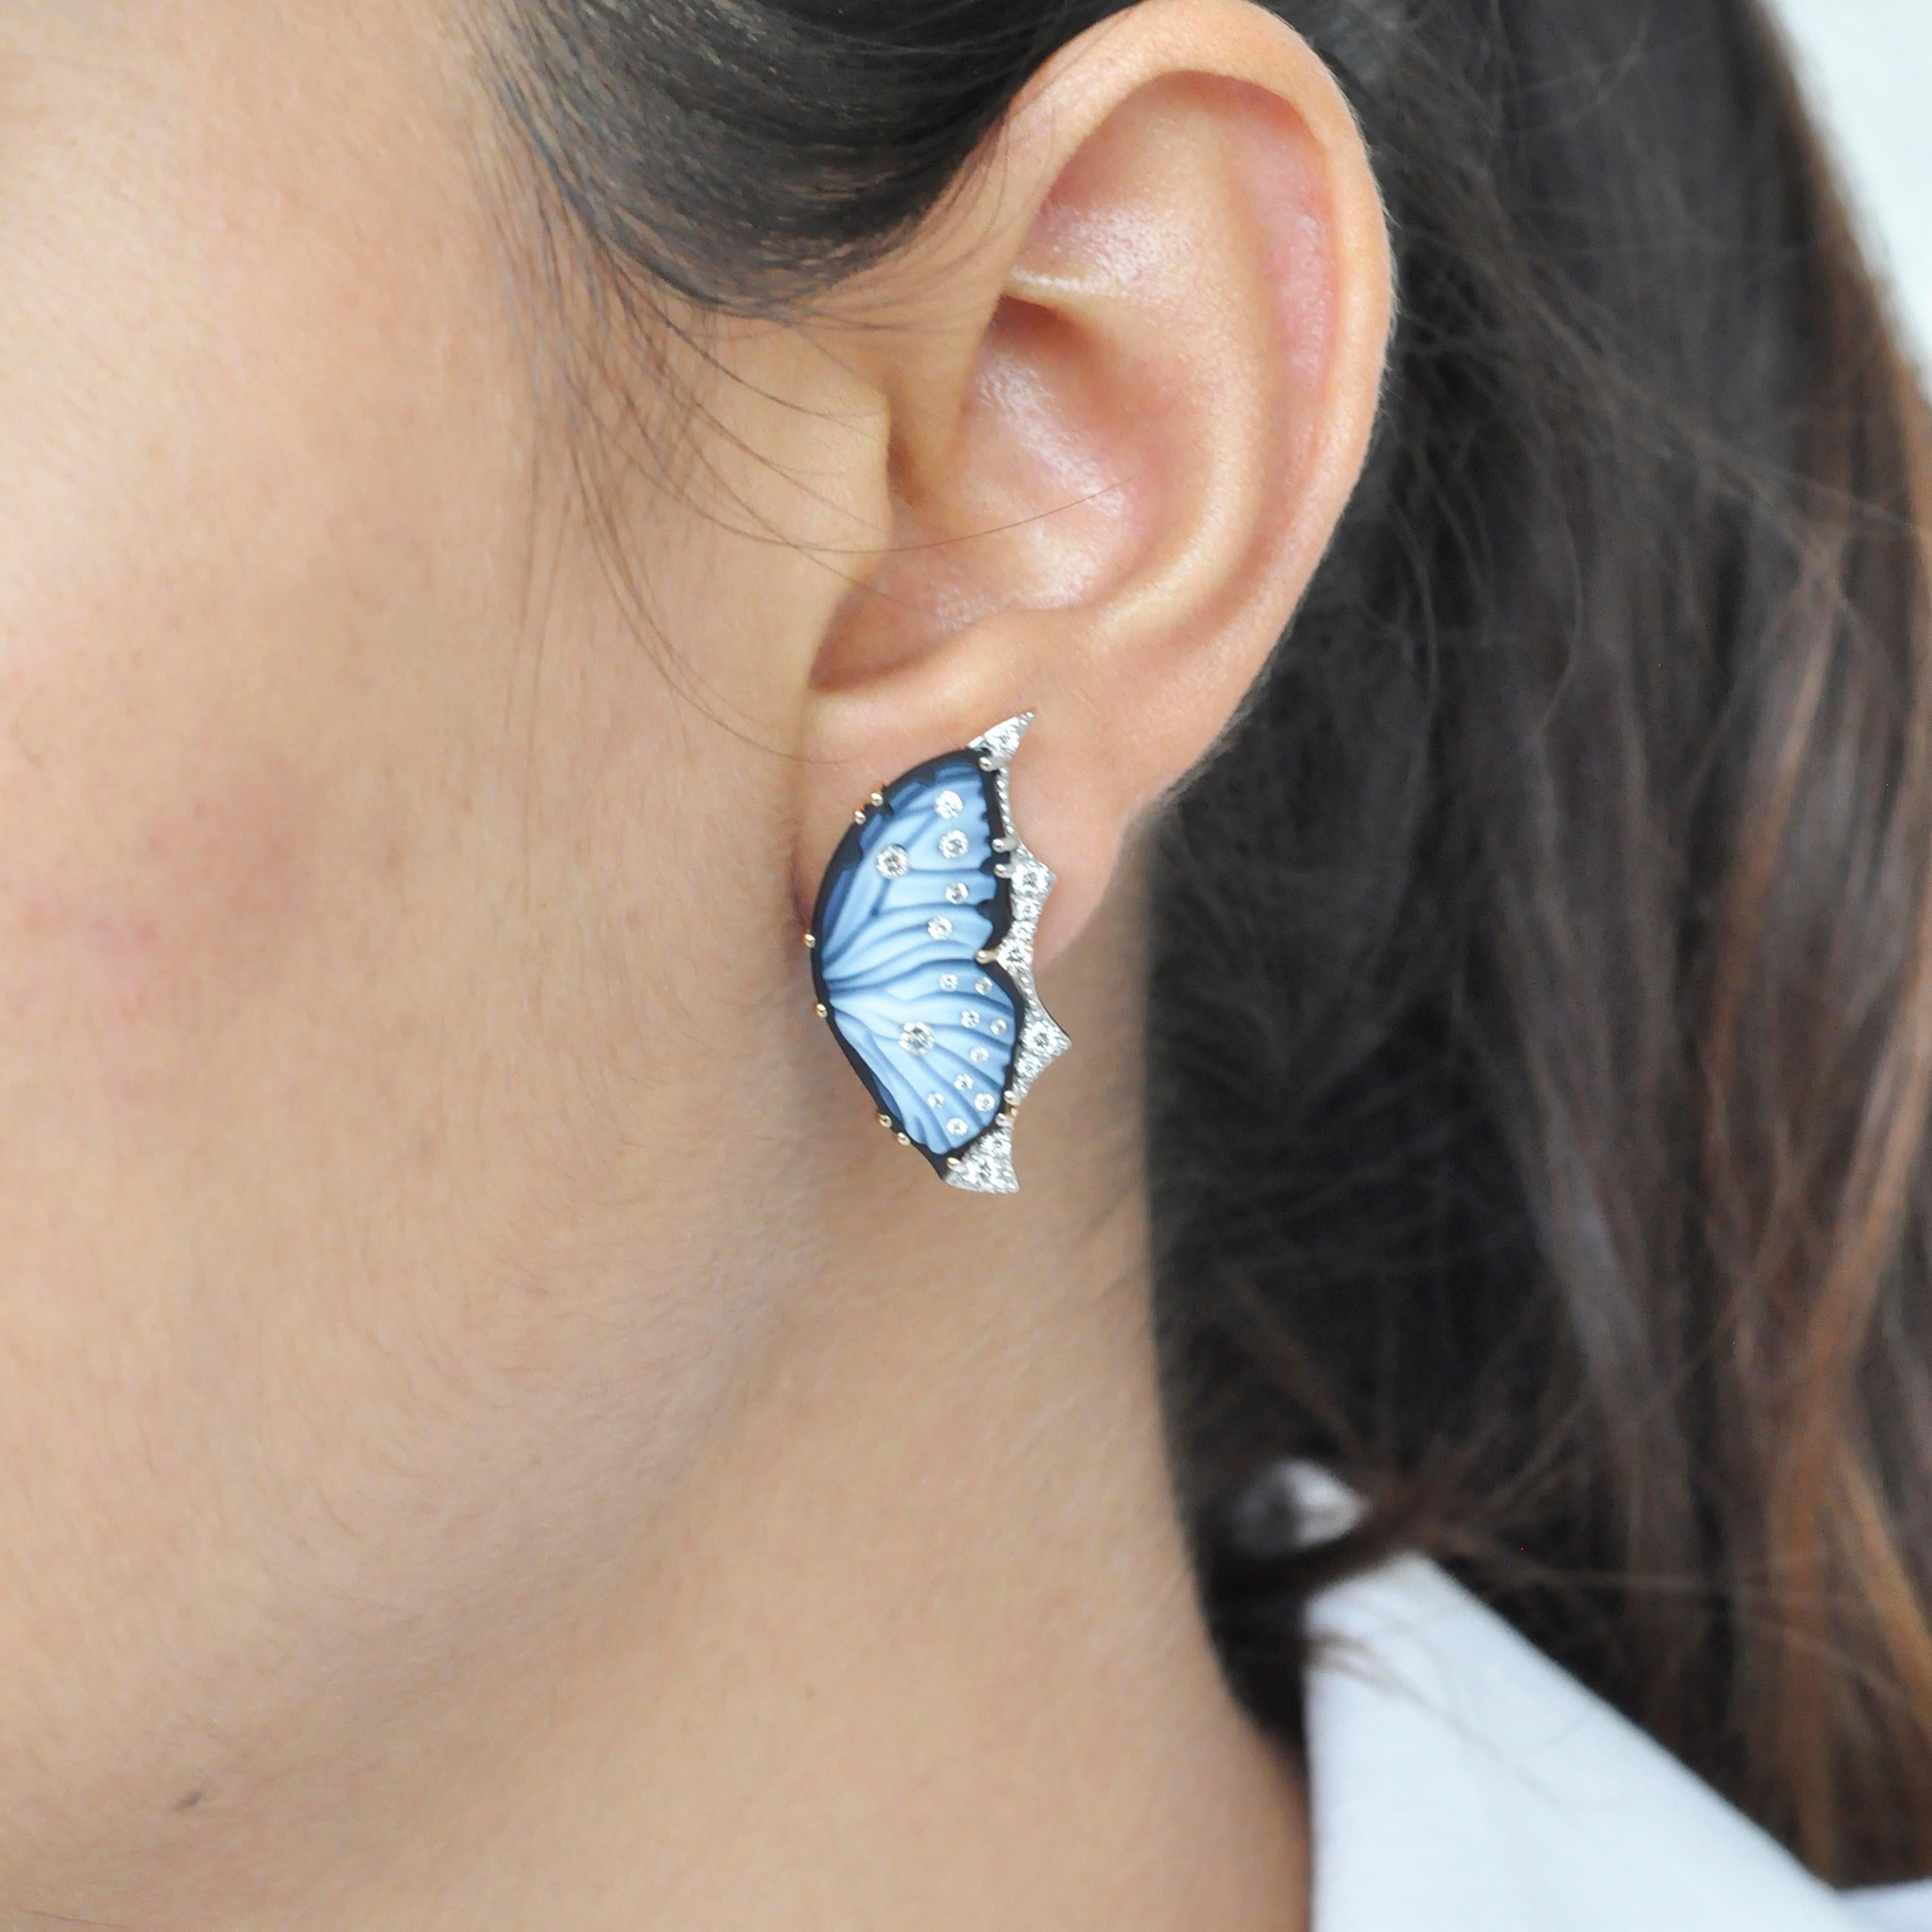 Adorn your ears with these stunning hand-carved 18 Karat gold agate butterfly contemporary stud earrings. Each earring is a miniature work of art, showcasing the intricate beauty of nature in a modern and sophisticated design.

The focal point of